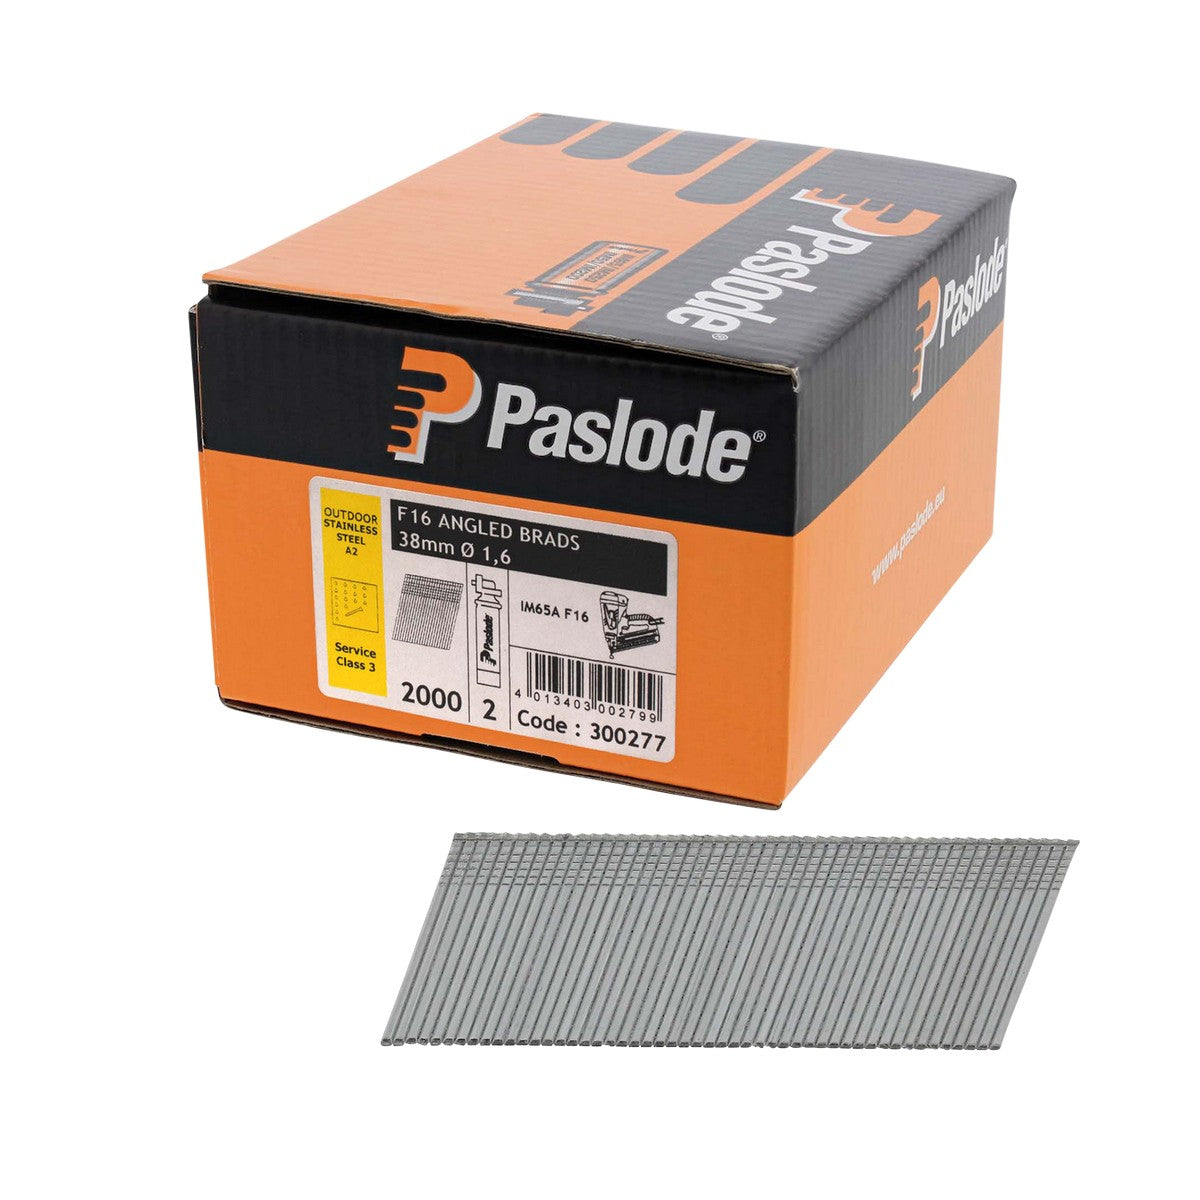 Paslode IM65A Stainless Steel Angled Brad Nails  - 38 mm